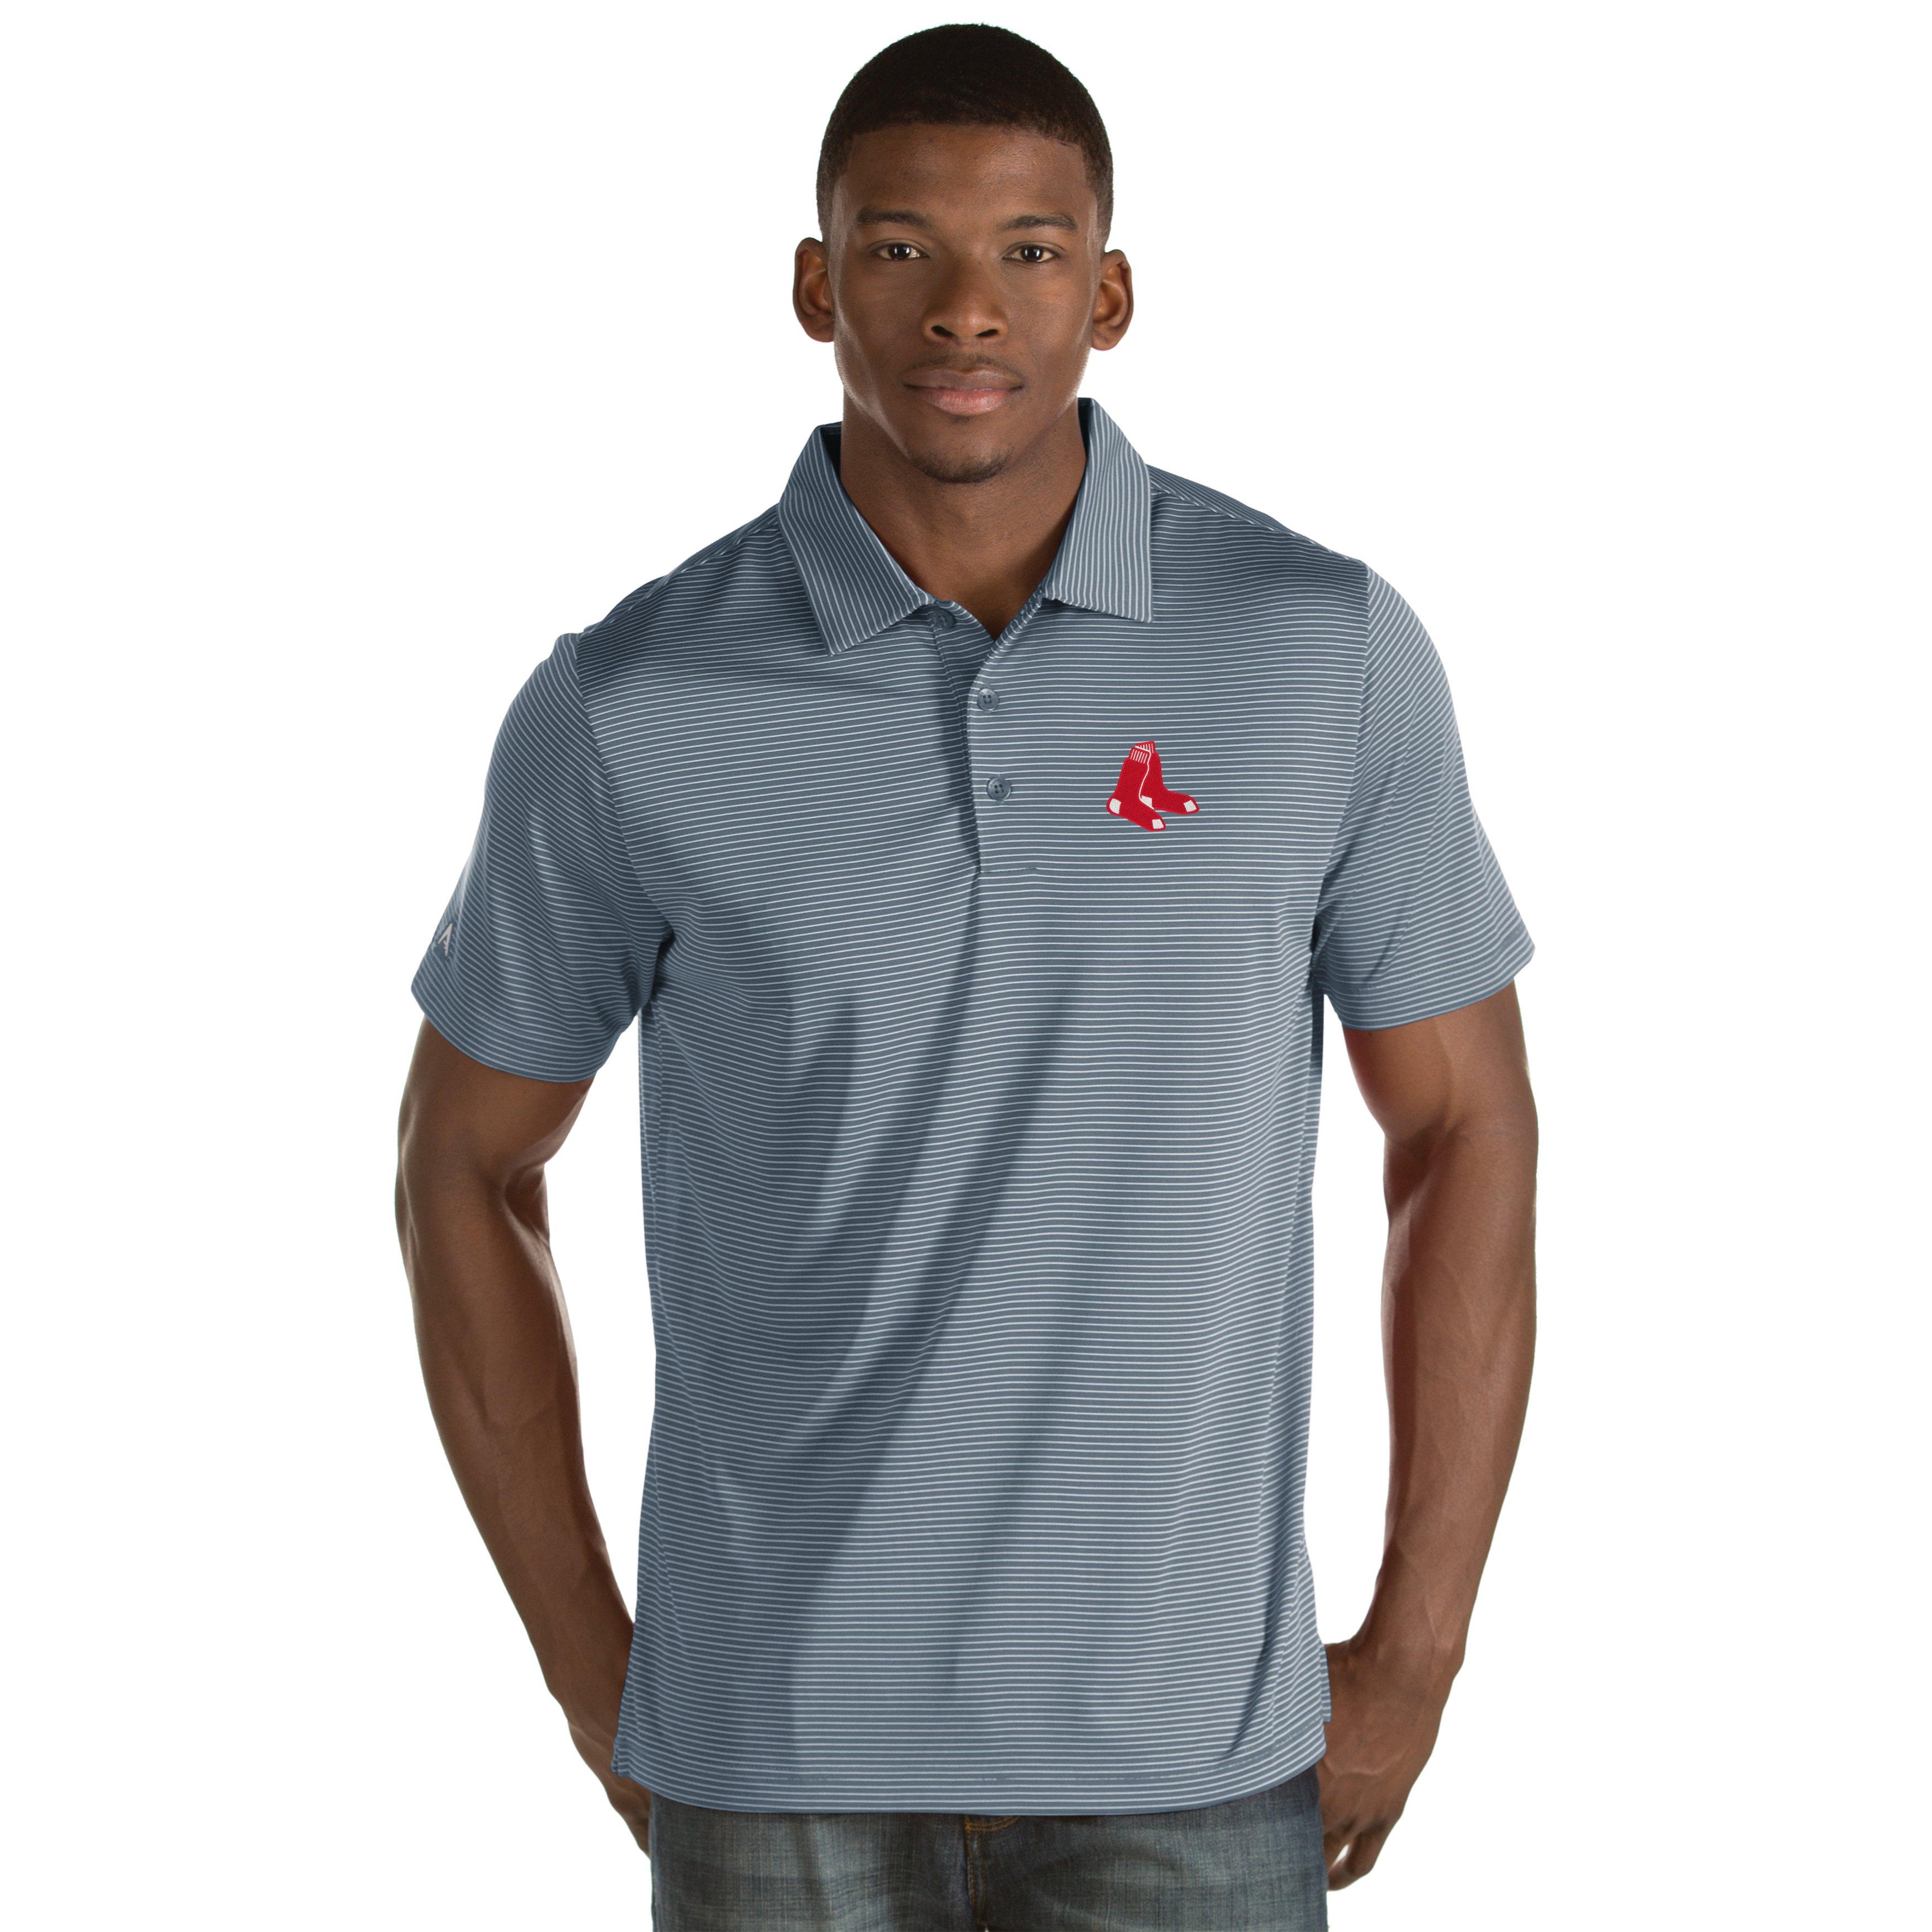 red sox polo shirt